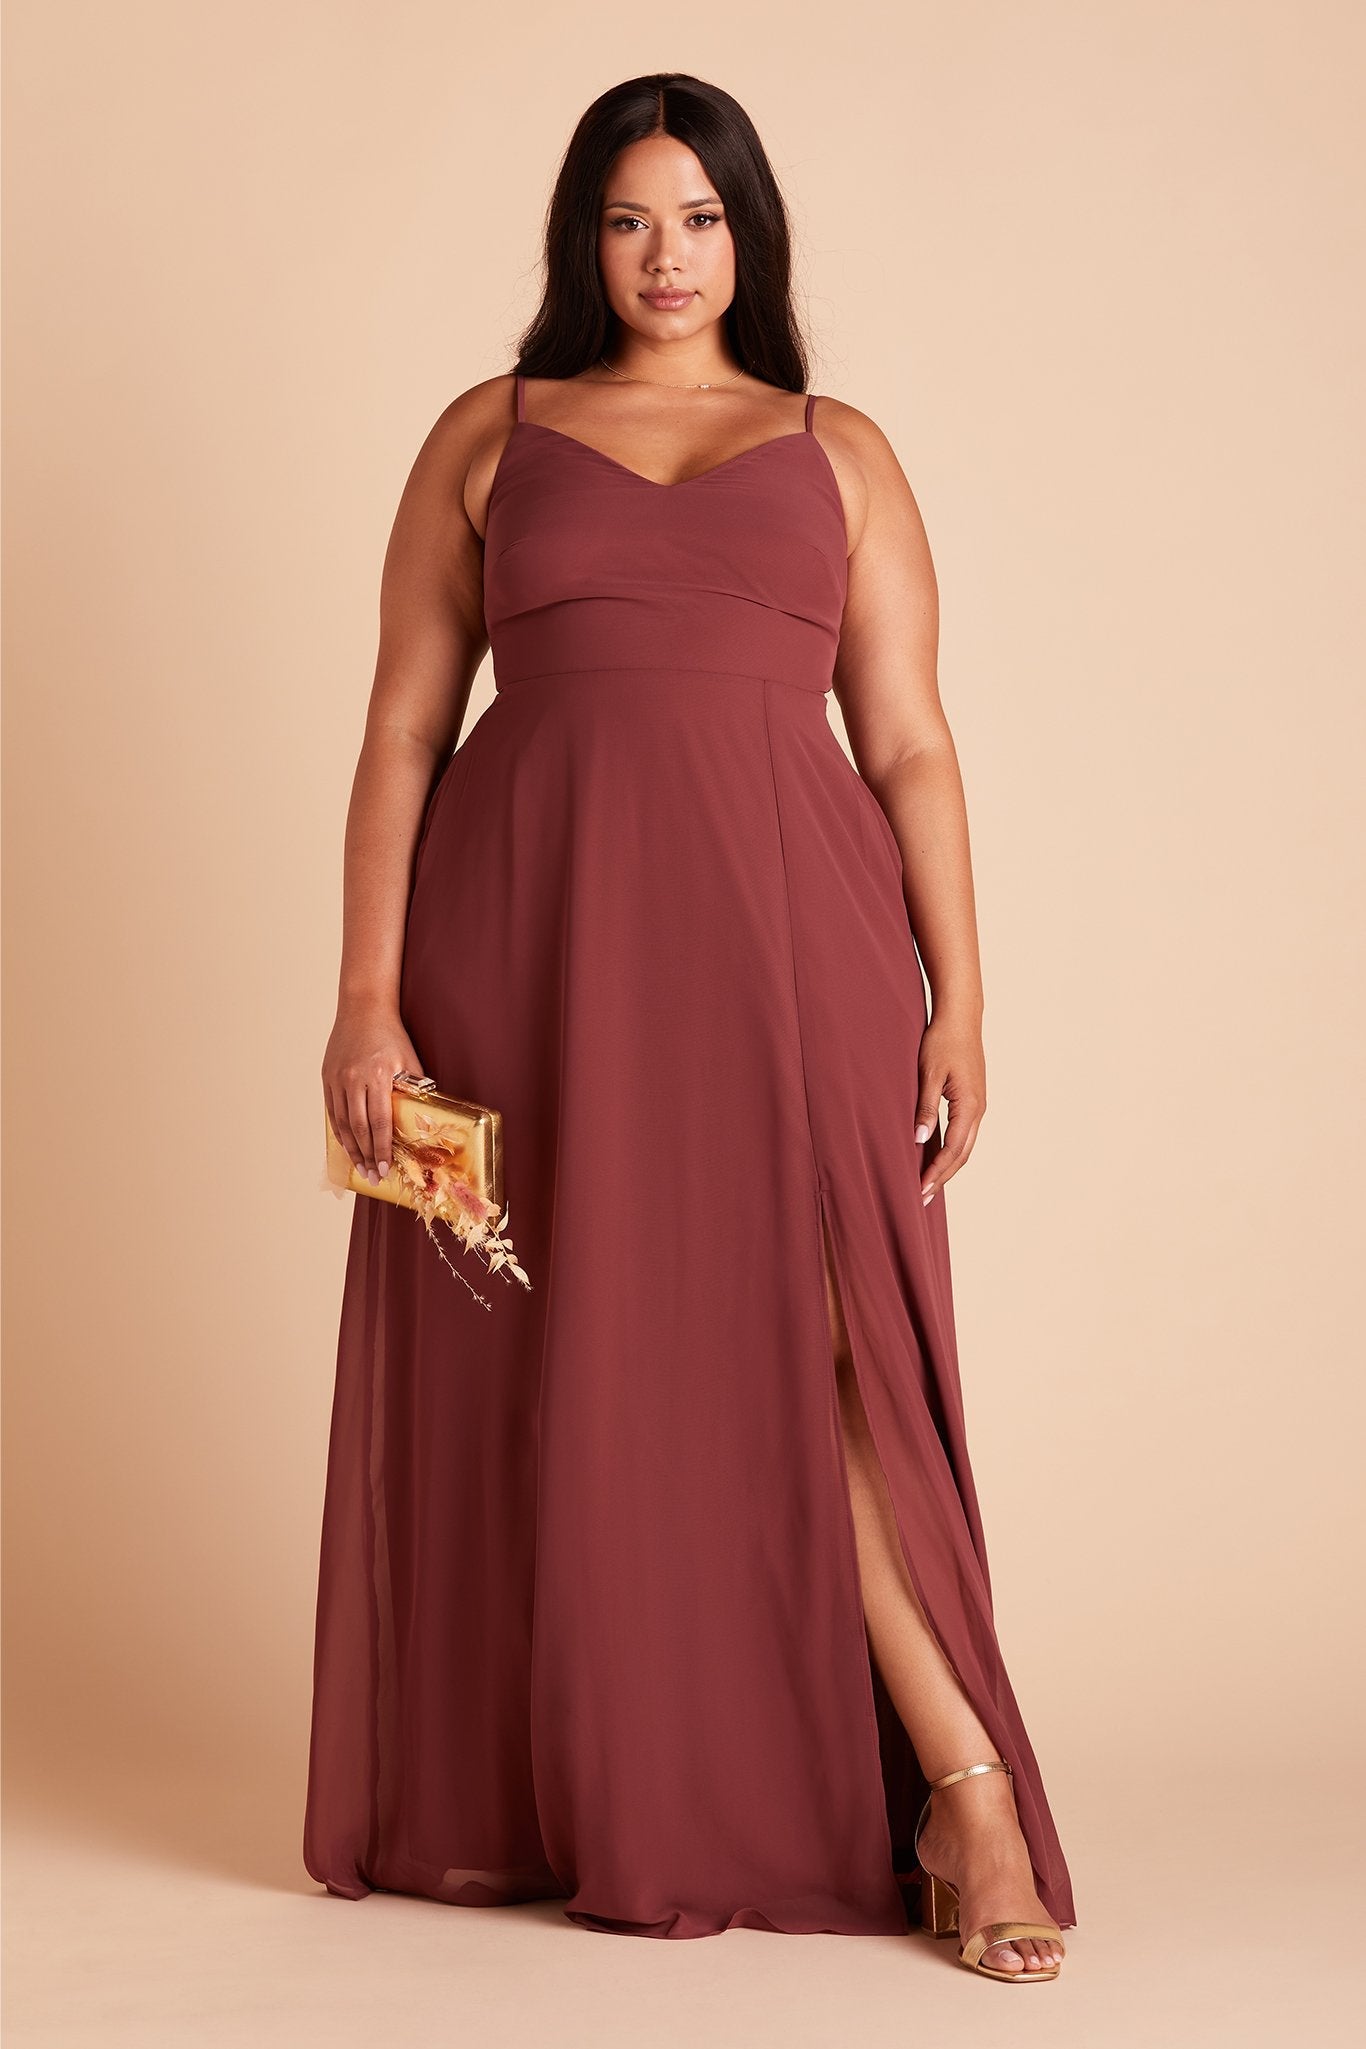 Devin convertible plus size bridesmaids dress with slit in rosewood chiffon by Birdy Grey, front view